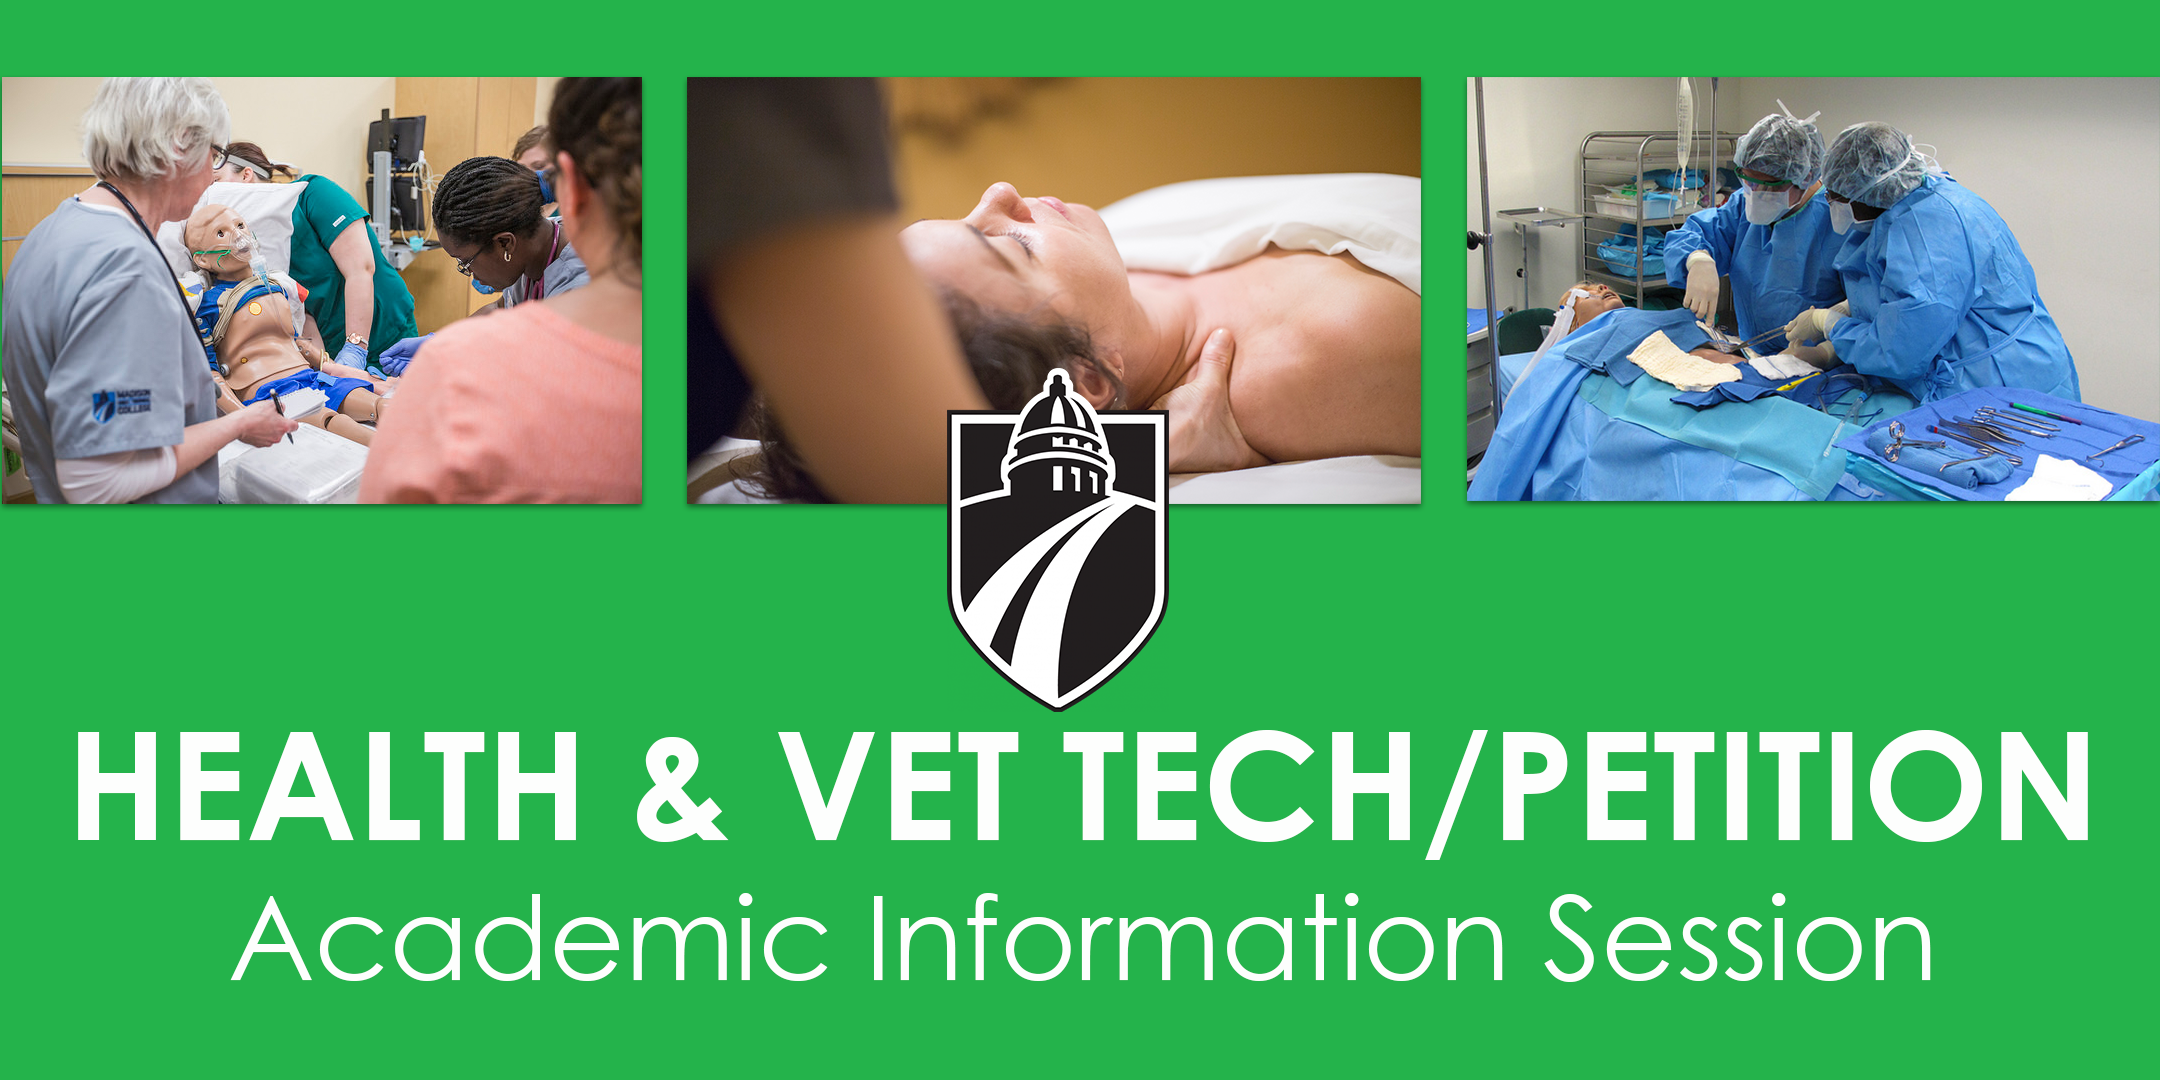 Health and Vet Tech/Petition Academic Information Session